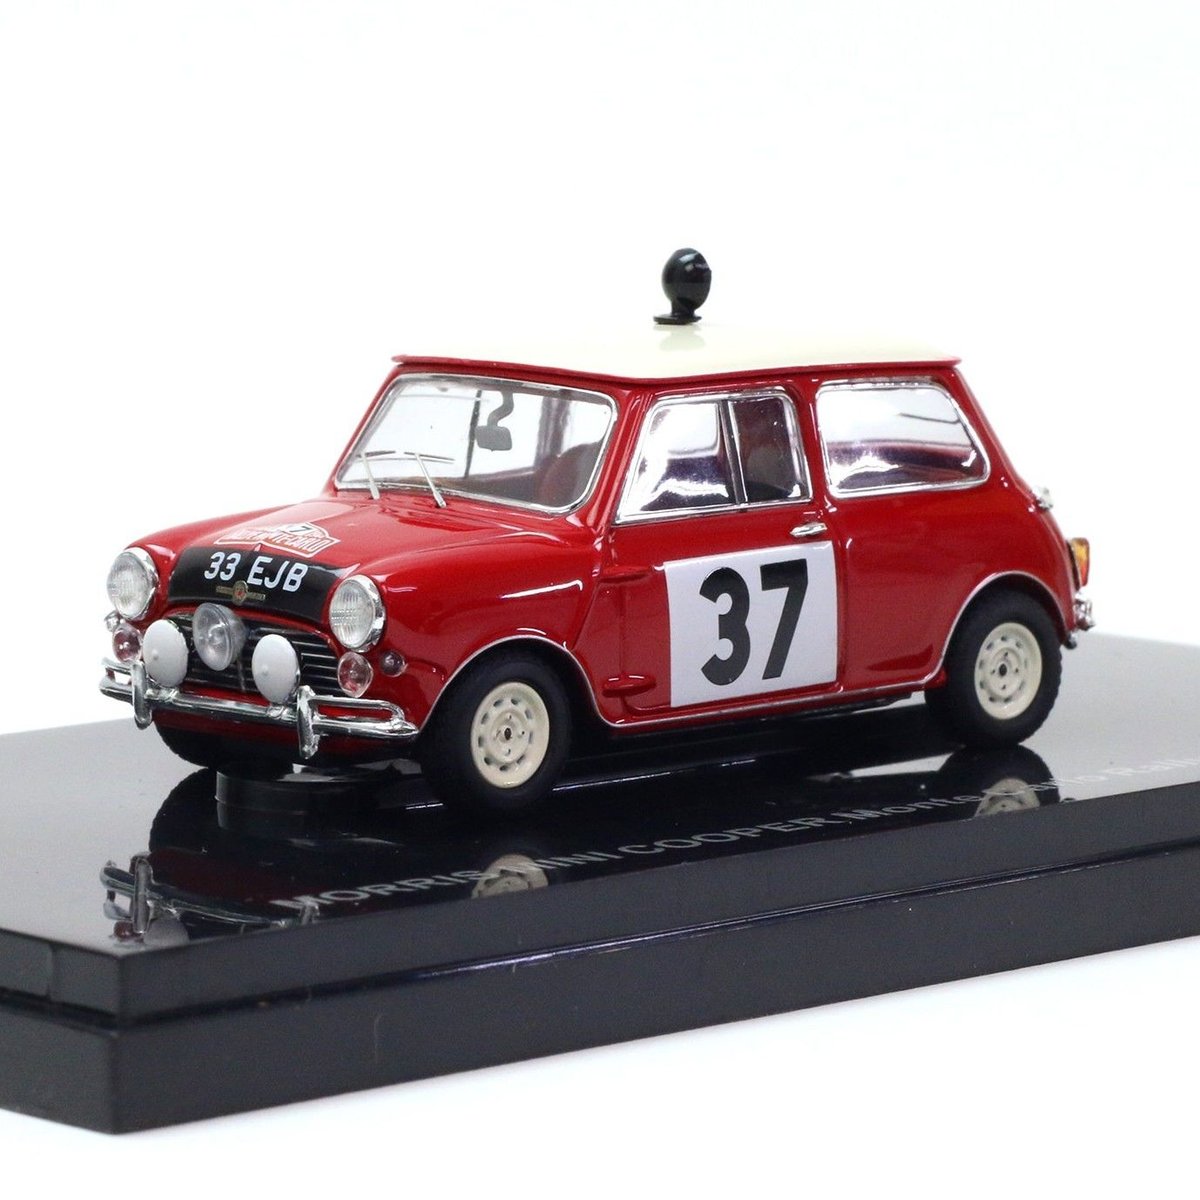 1/43 Spark Morris Cooper S モンテカルロ 1964